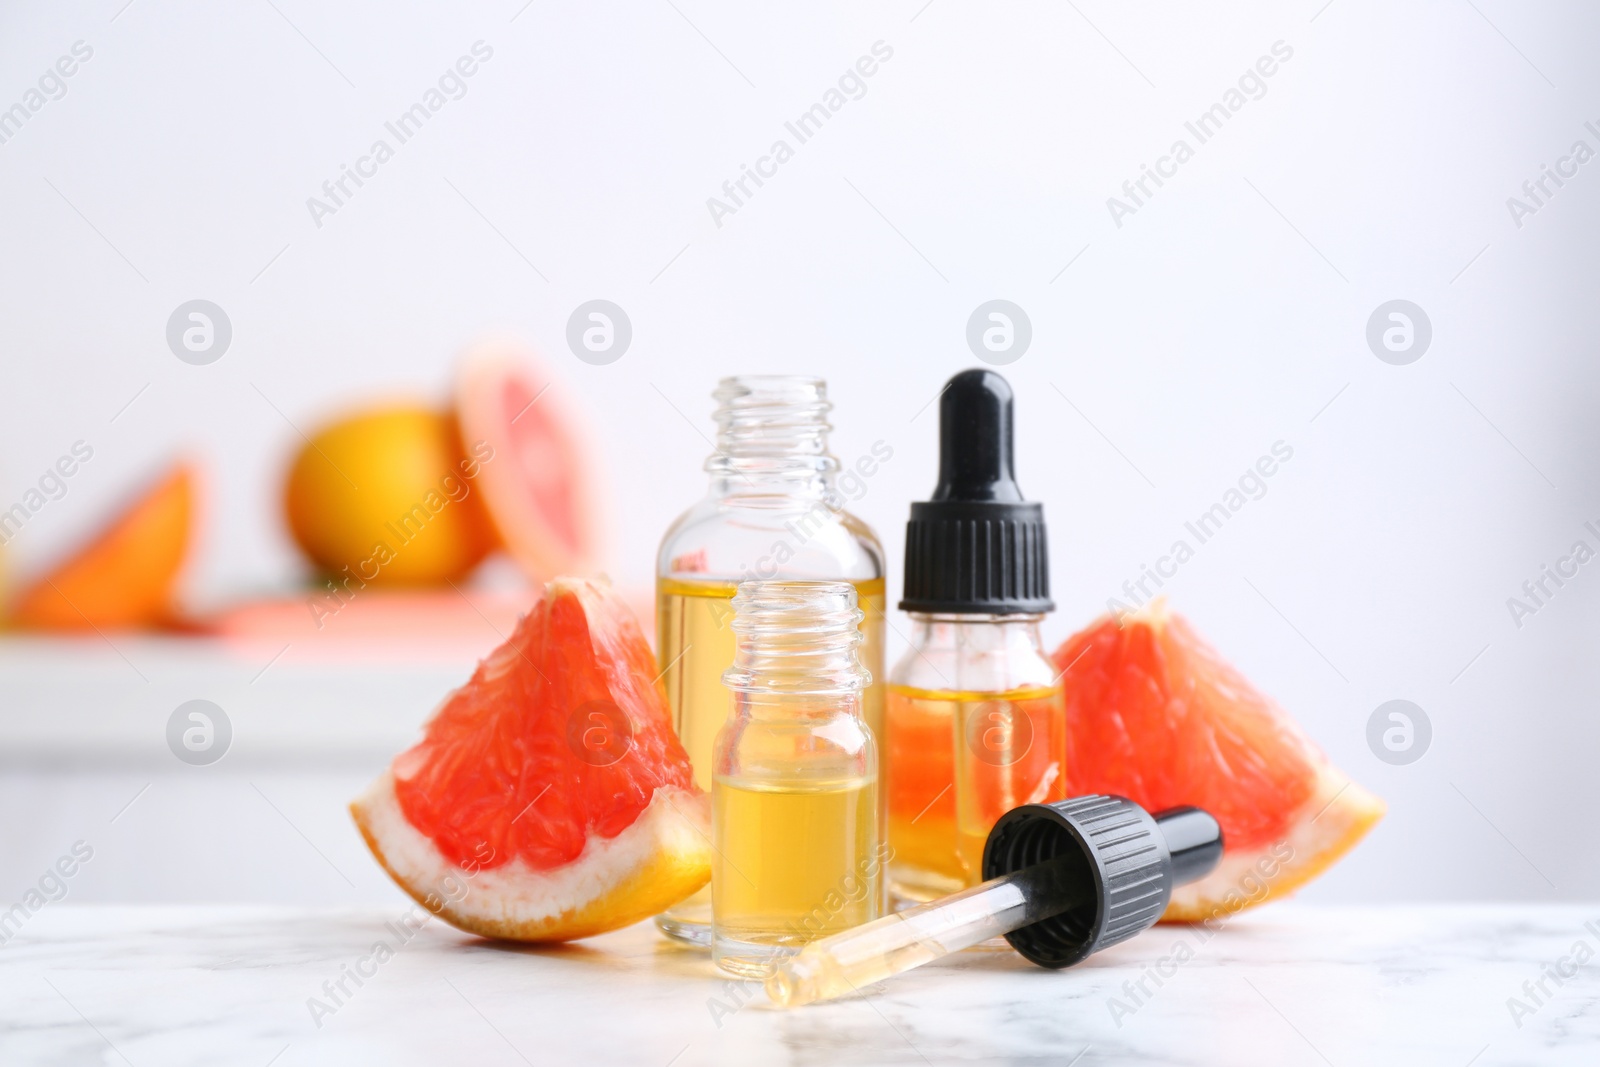 Photo of Bottles of essential oil and grapefruit slices on table